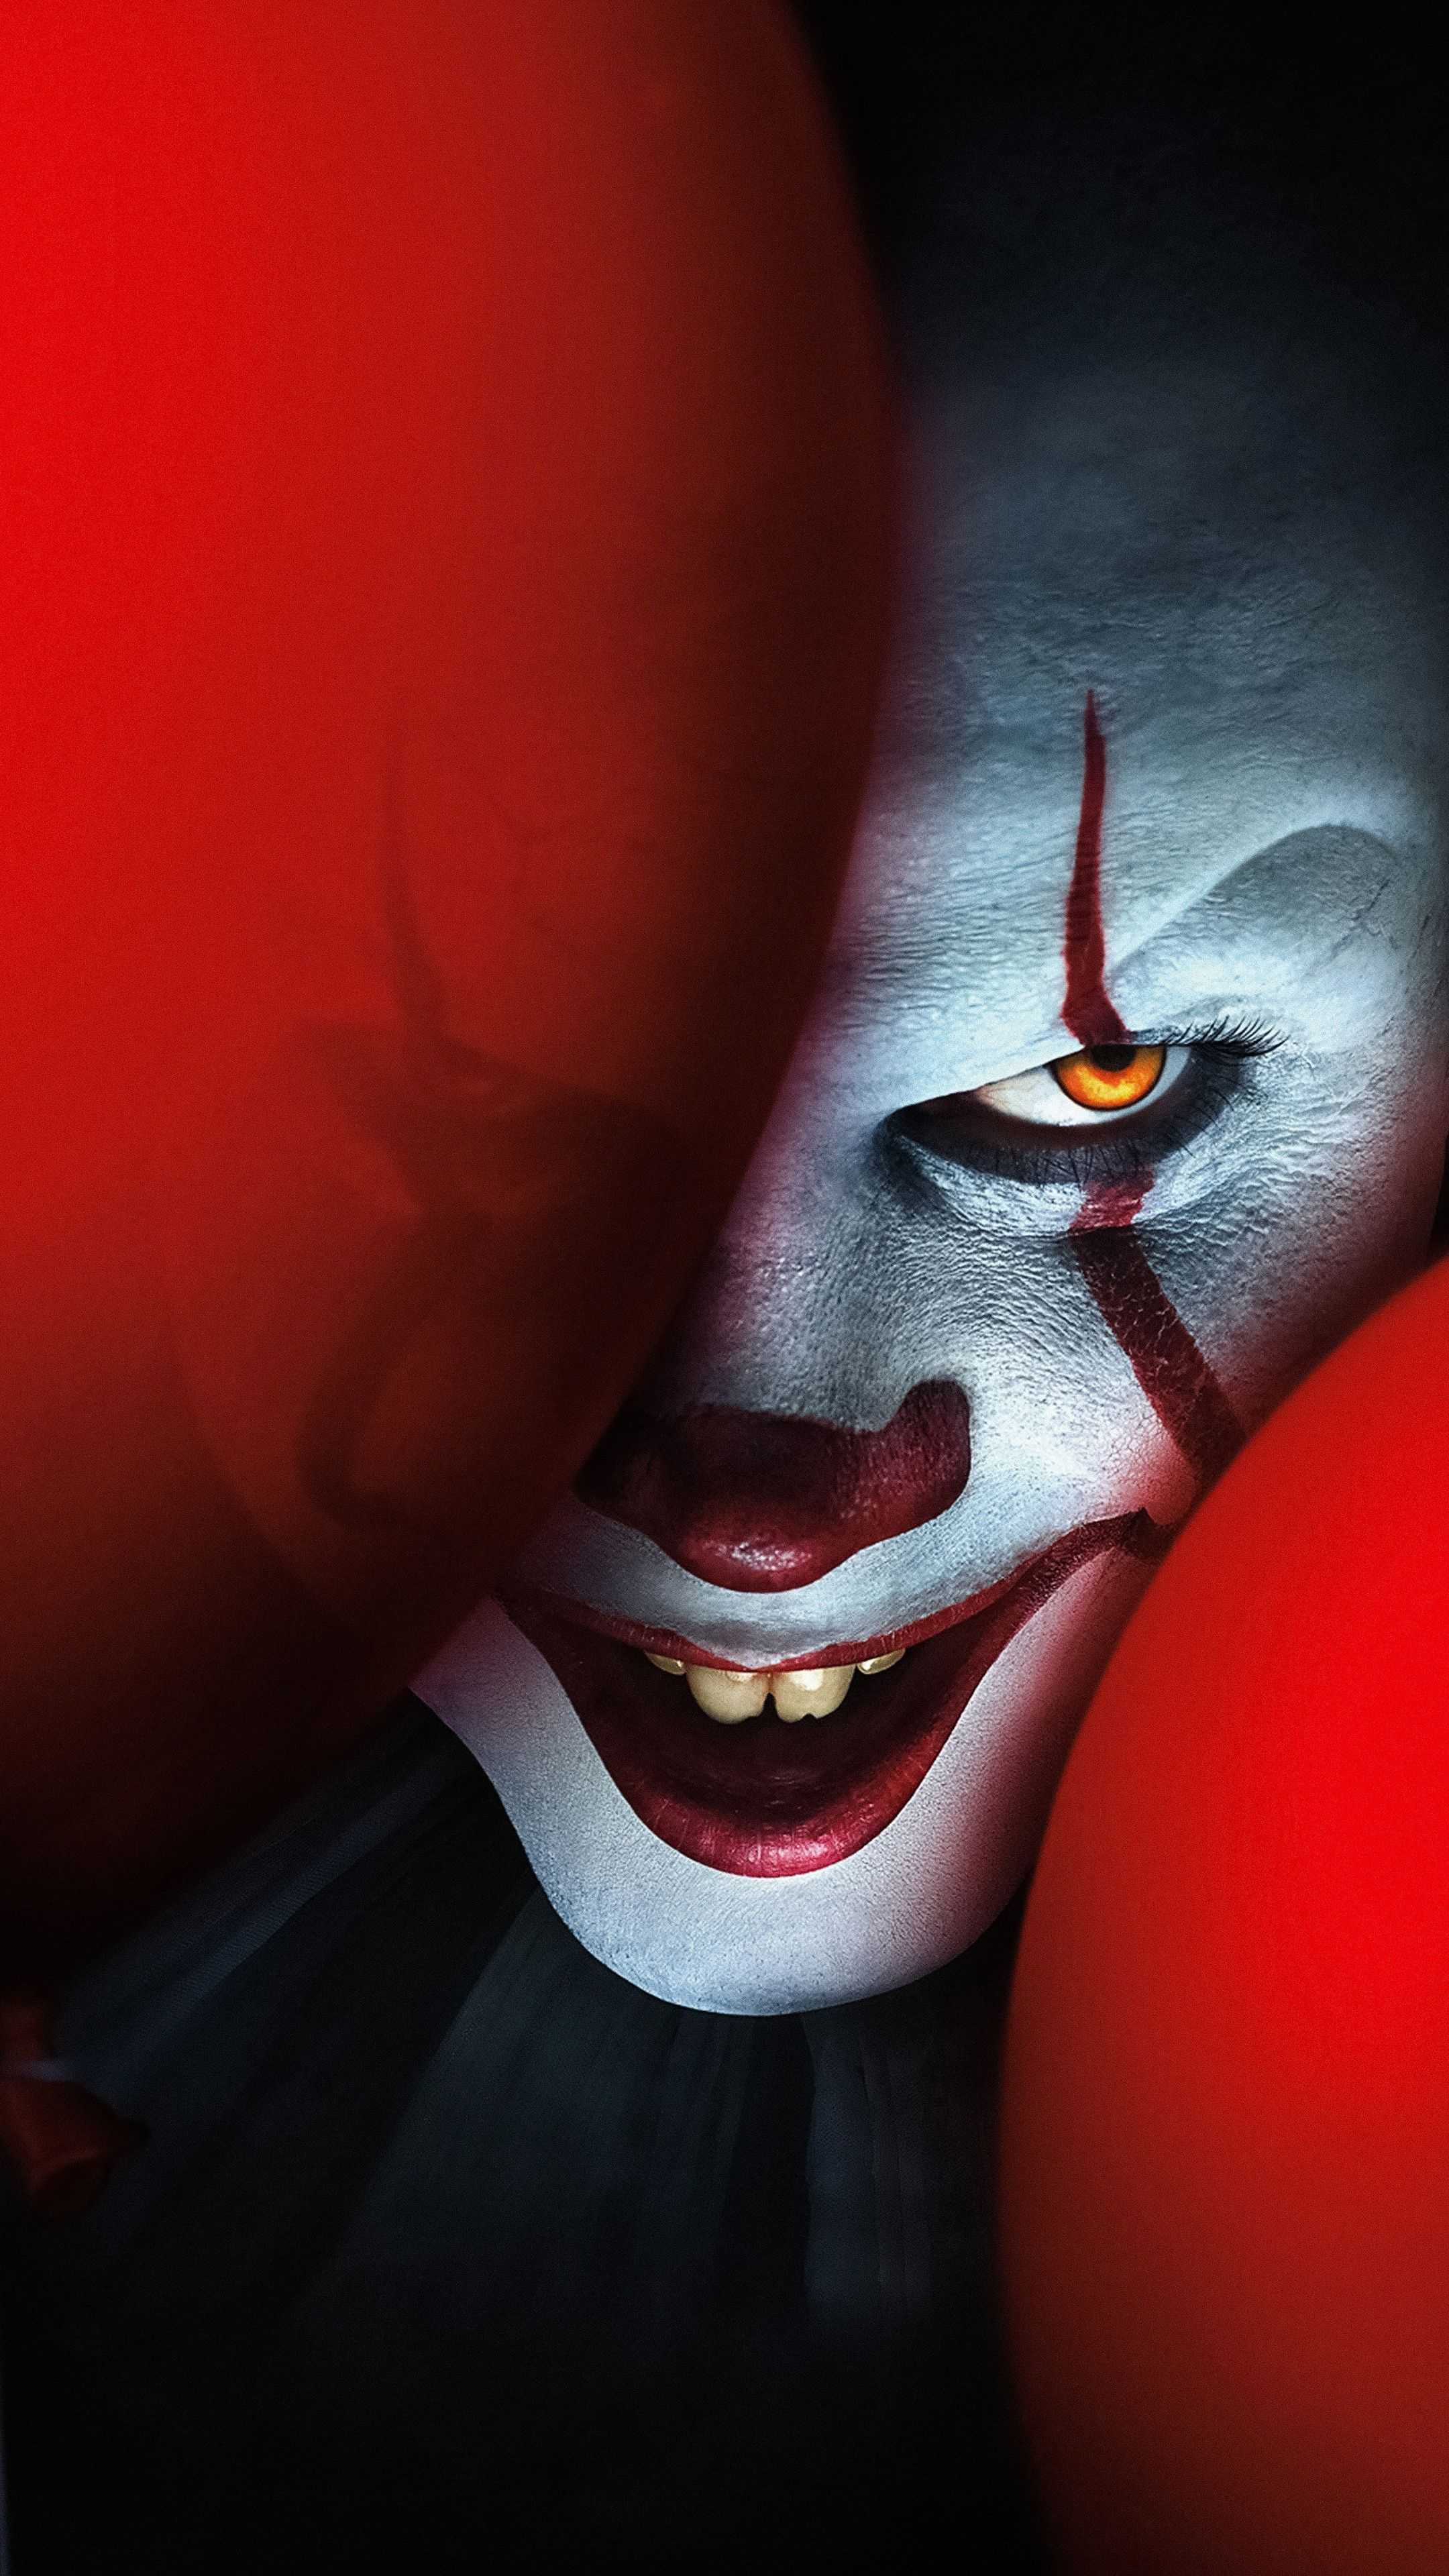 Pennywise the clown wallpaper 4k for mobiles and tablets - Horror